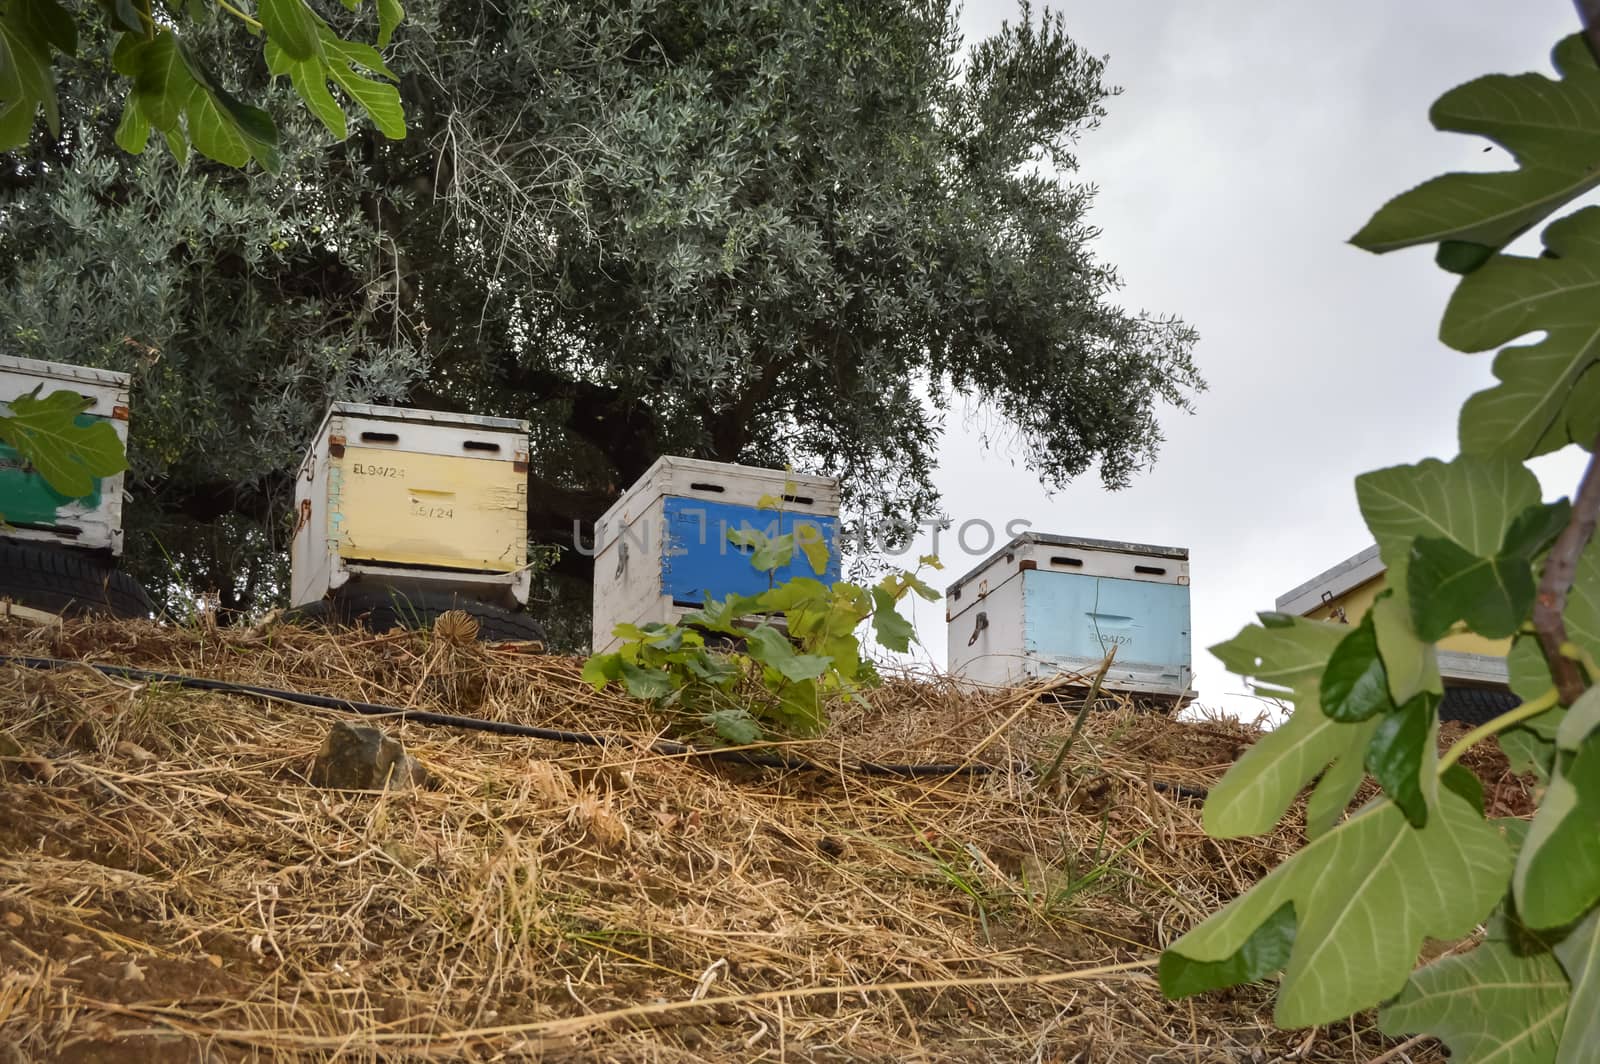 Several hives of different colors pose on tires in the countryside on the island of Crete